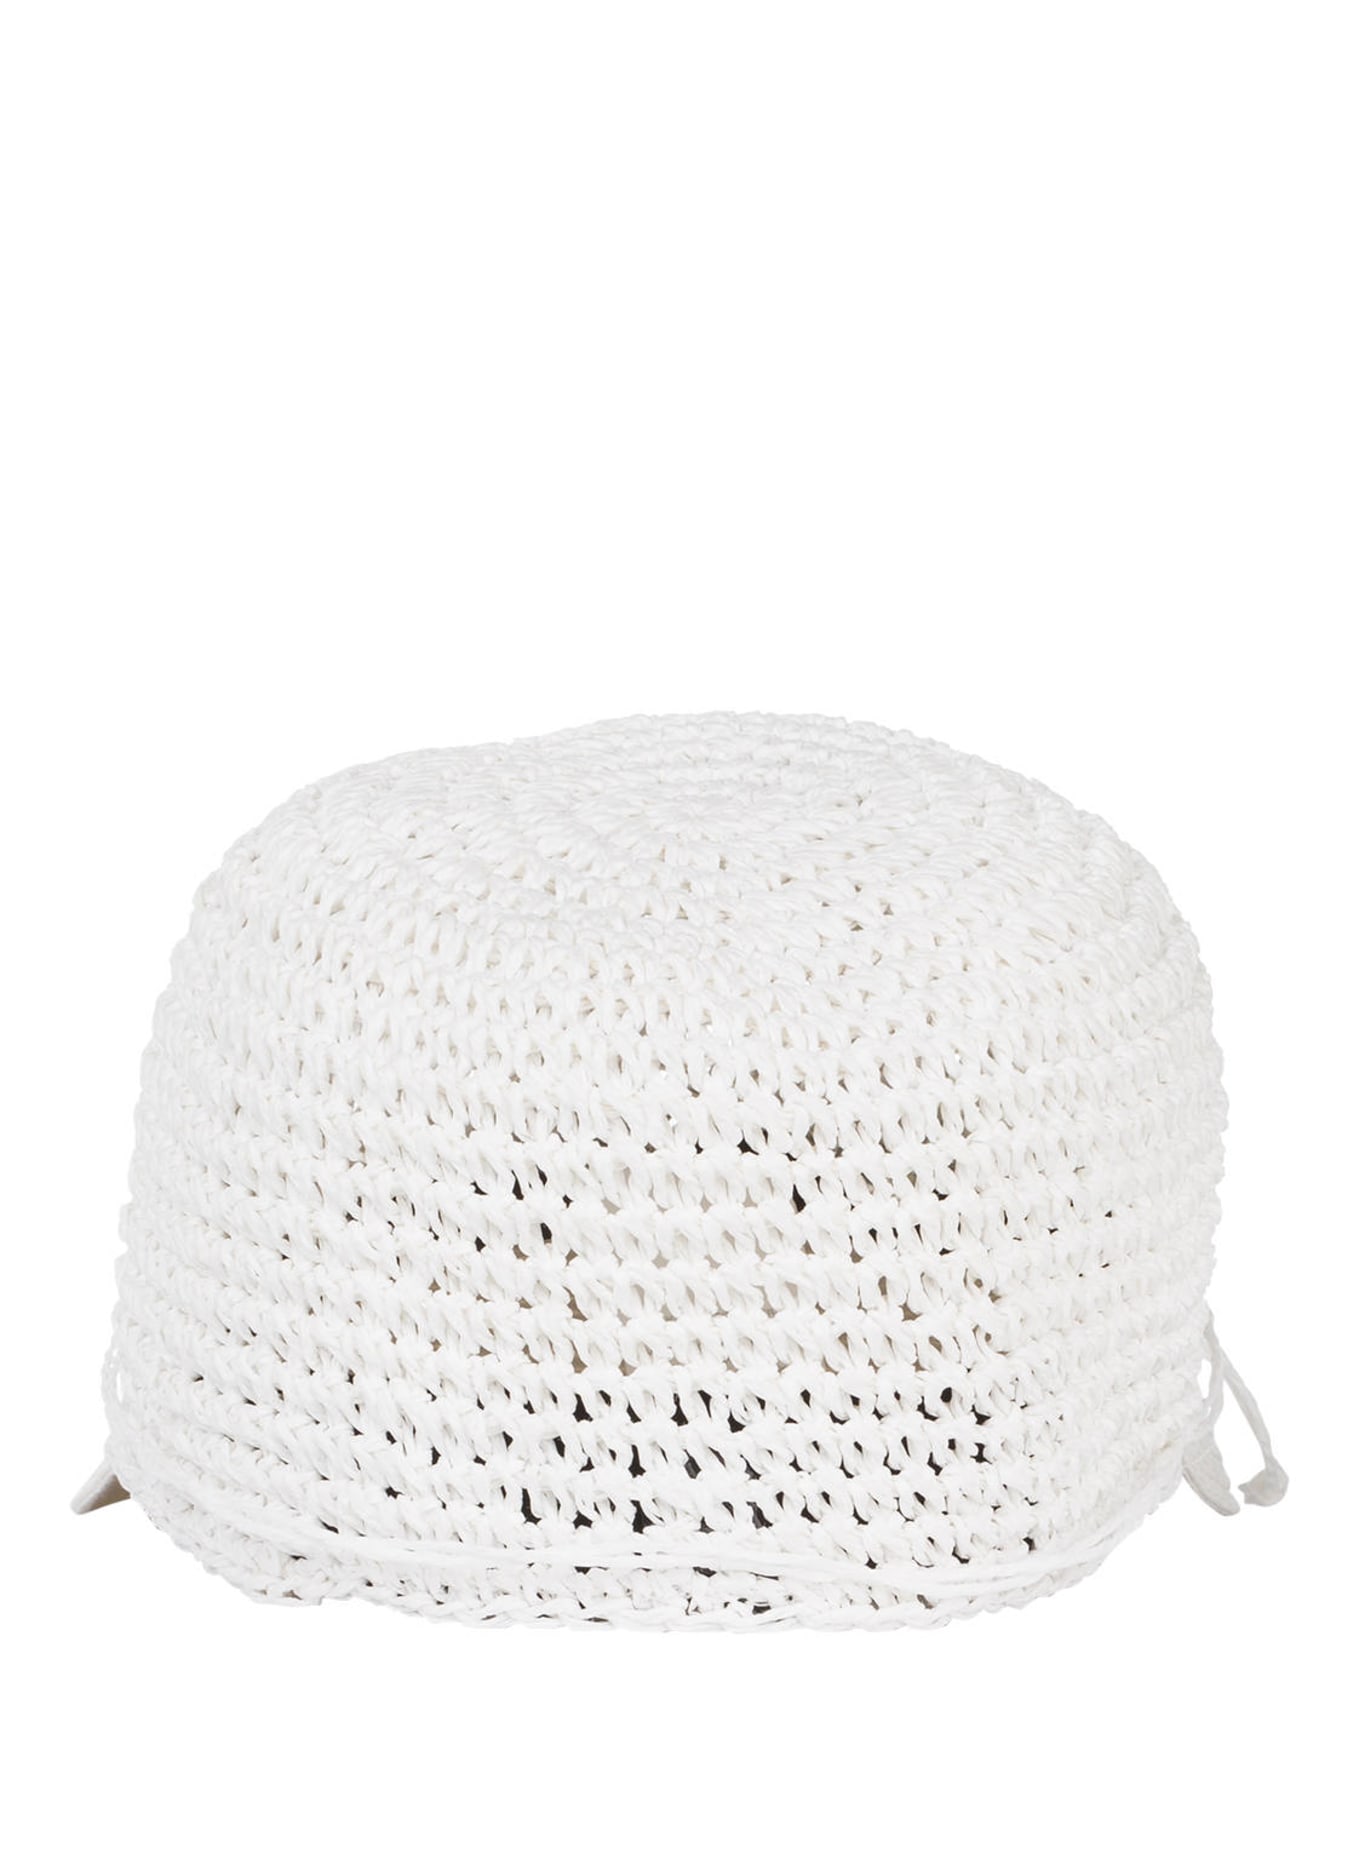 SEEBERGER Straw cap, Color: WHITE (Image 3)